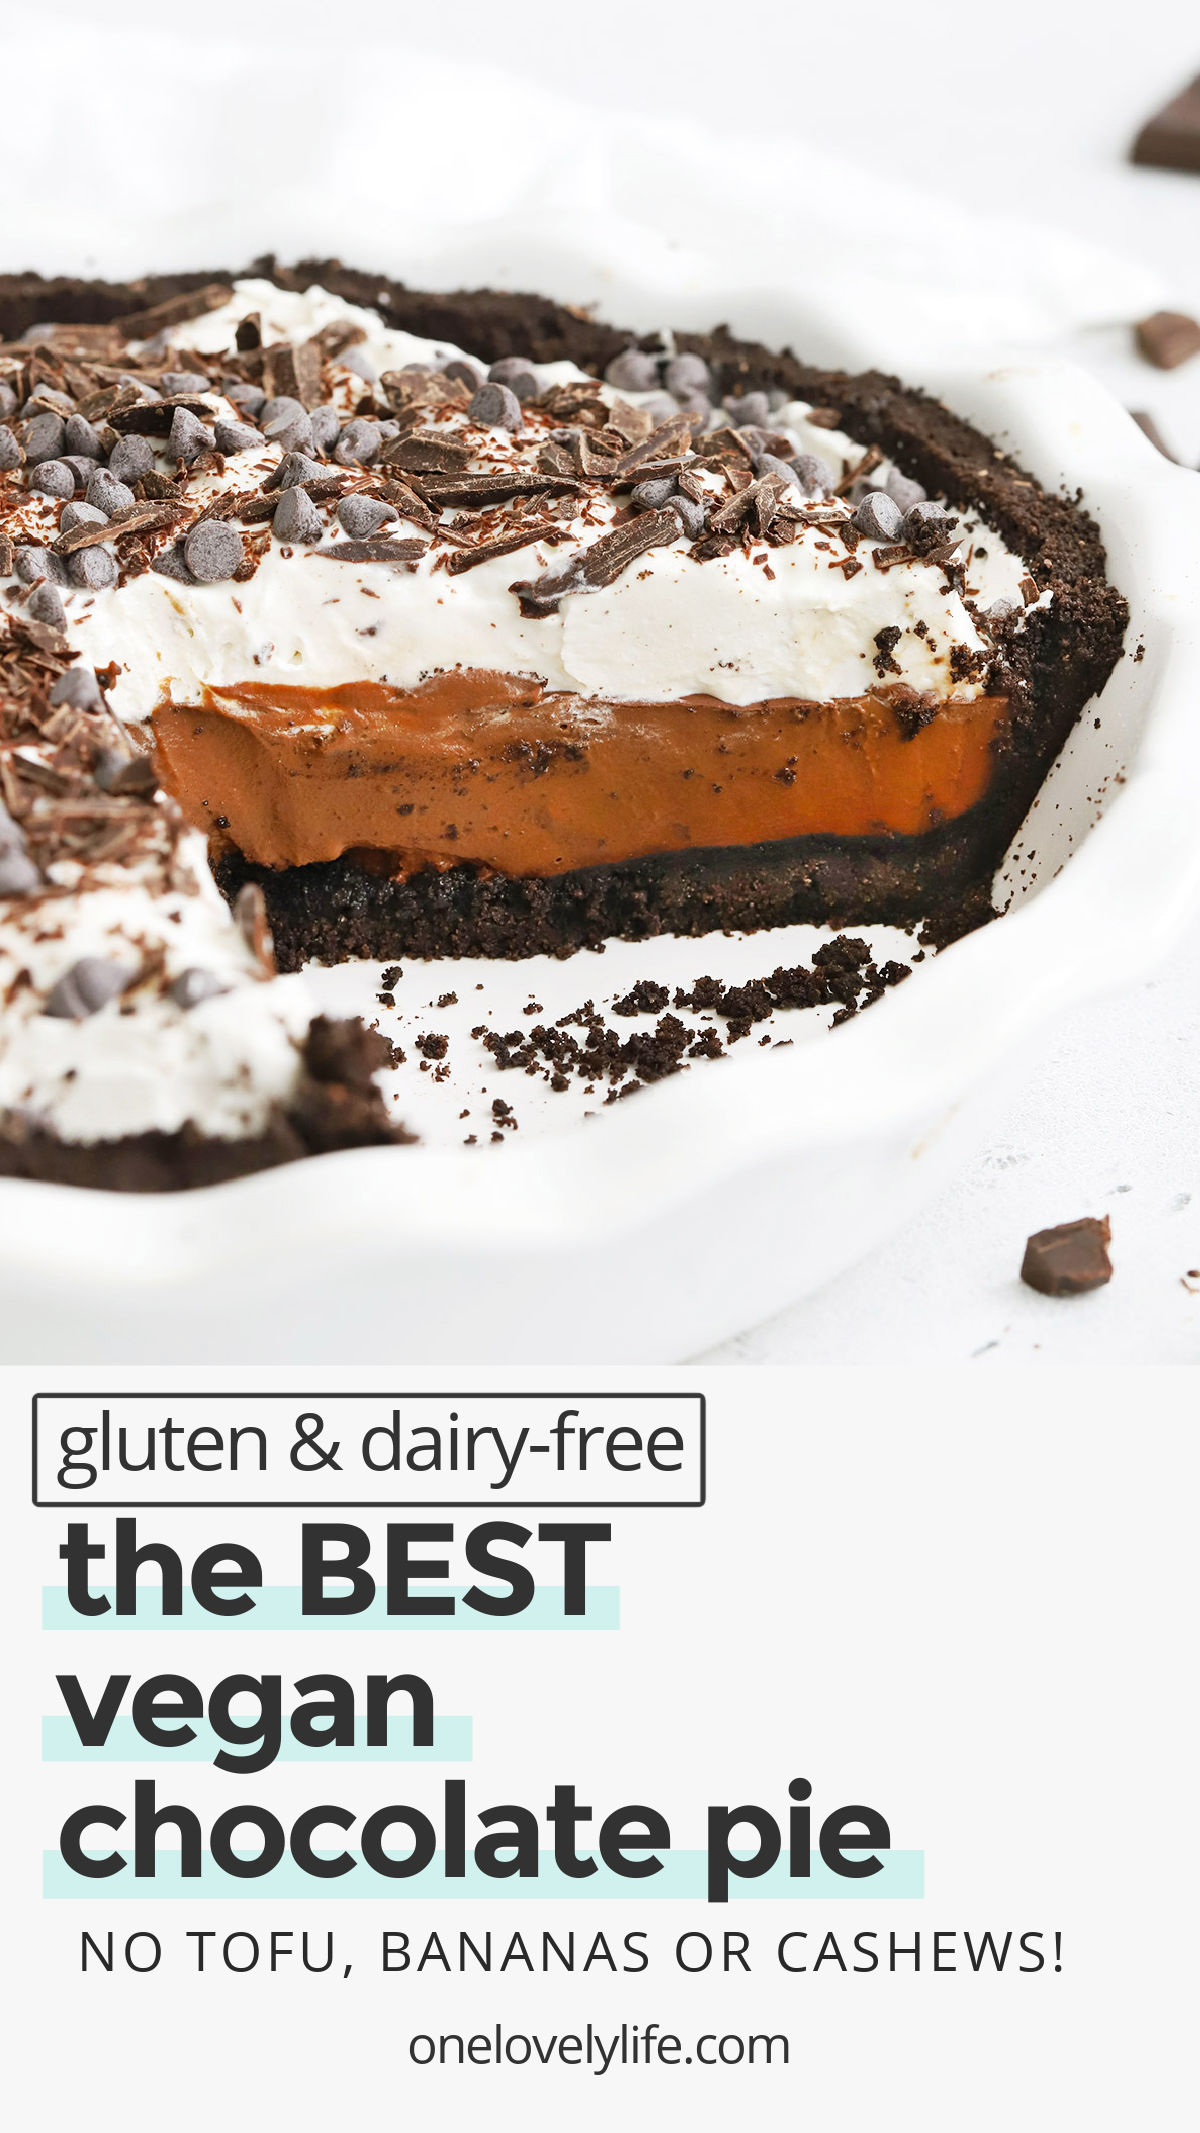 Vegan Chocolate Pie - This gorgeous dairy-free chocolate cream pie has a rich chocolatey filling and crispy chocolate cookie crust your whole family will flip for! (Gluten-Free, Dairy-Free) // Vegan Chocolate Pie // Dairy-Free Chocolate Pie // Vegan Chocolate Pudding Pie // Dairy-Free Chocolate cream pie #chocolate #chocolatepie #glutenfreepie #thanskgiving #vegan #glutenfree